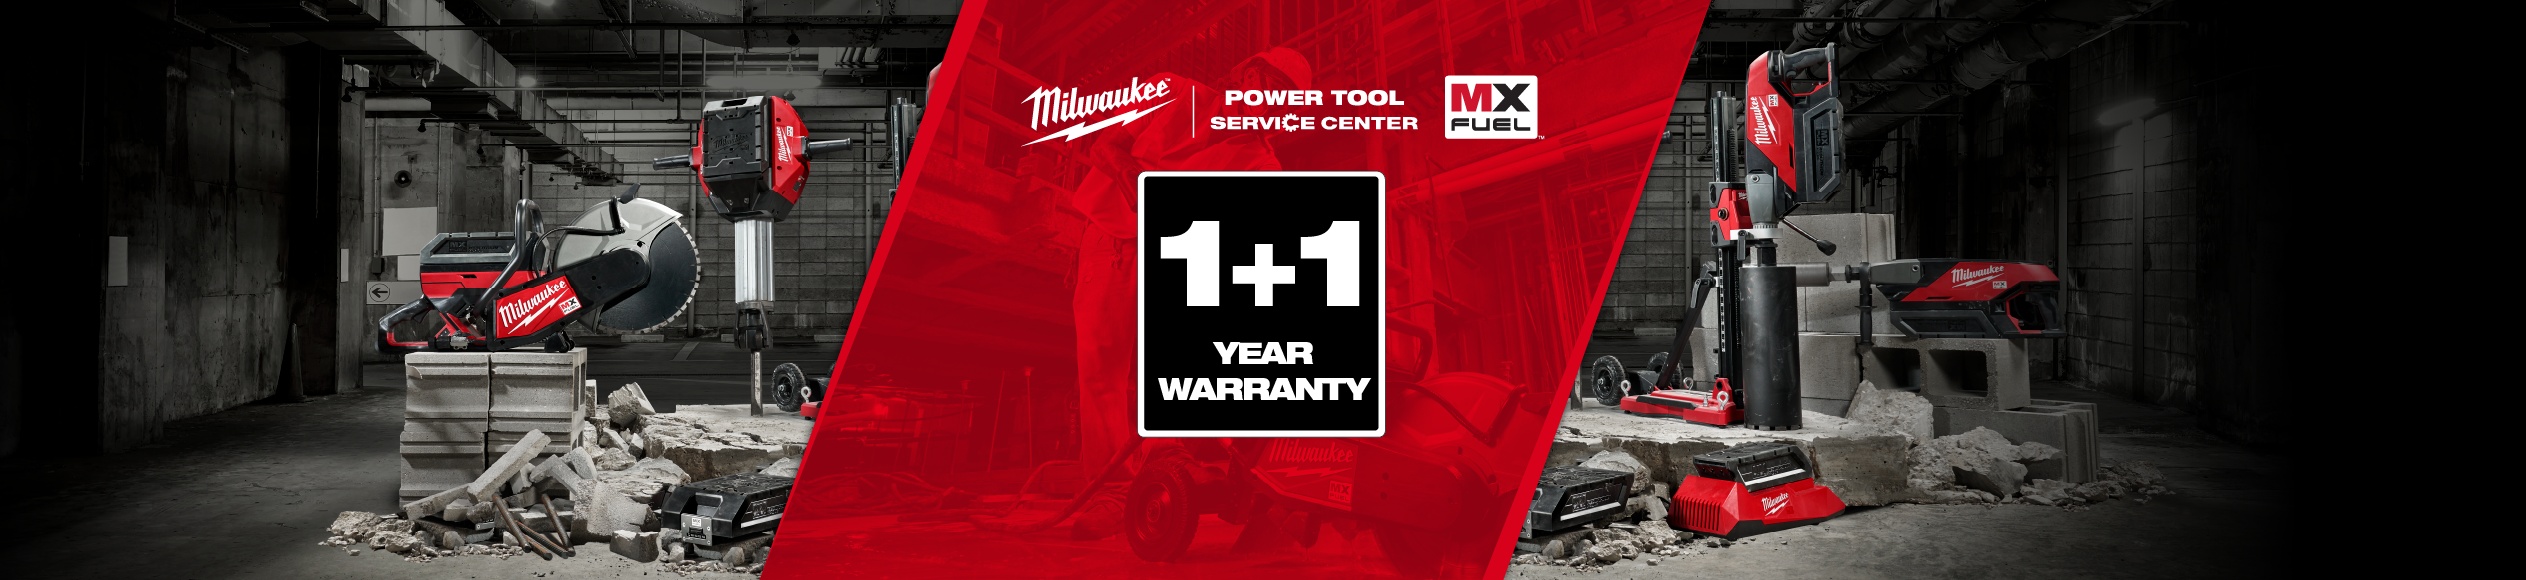 Register Your MX FUEL Products Online for an ADDITIONAL 1 YEAR WARRANTY!